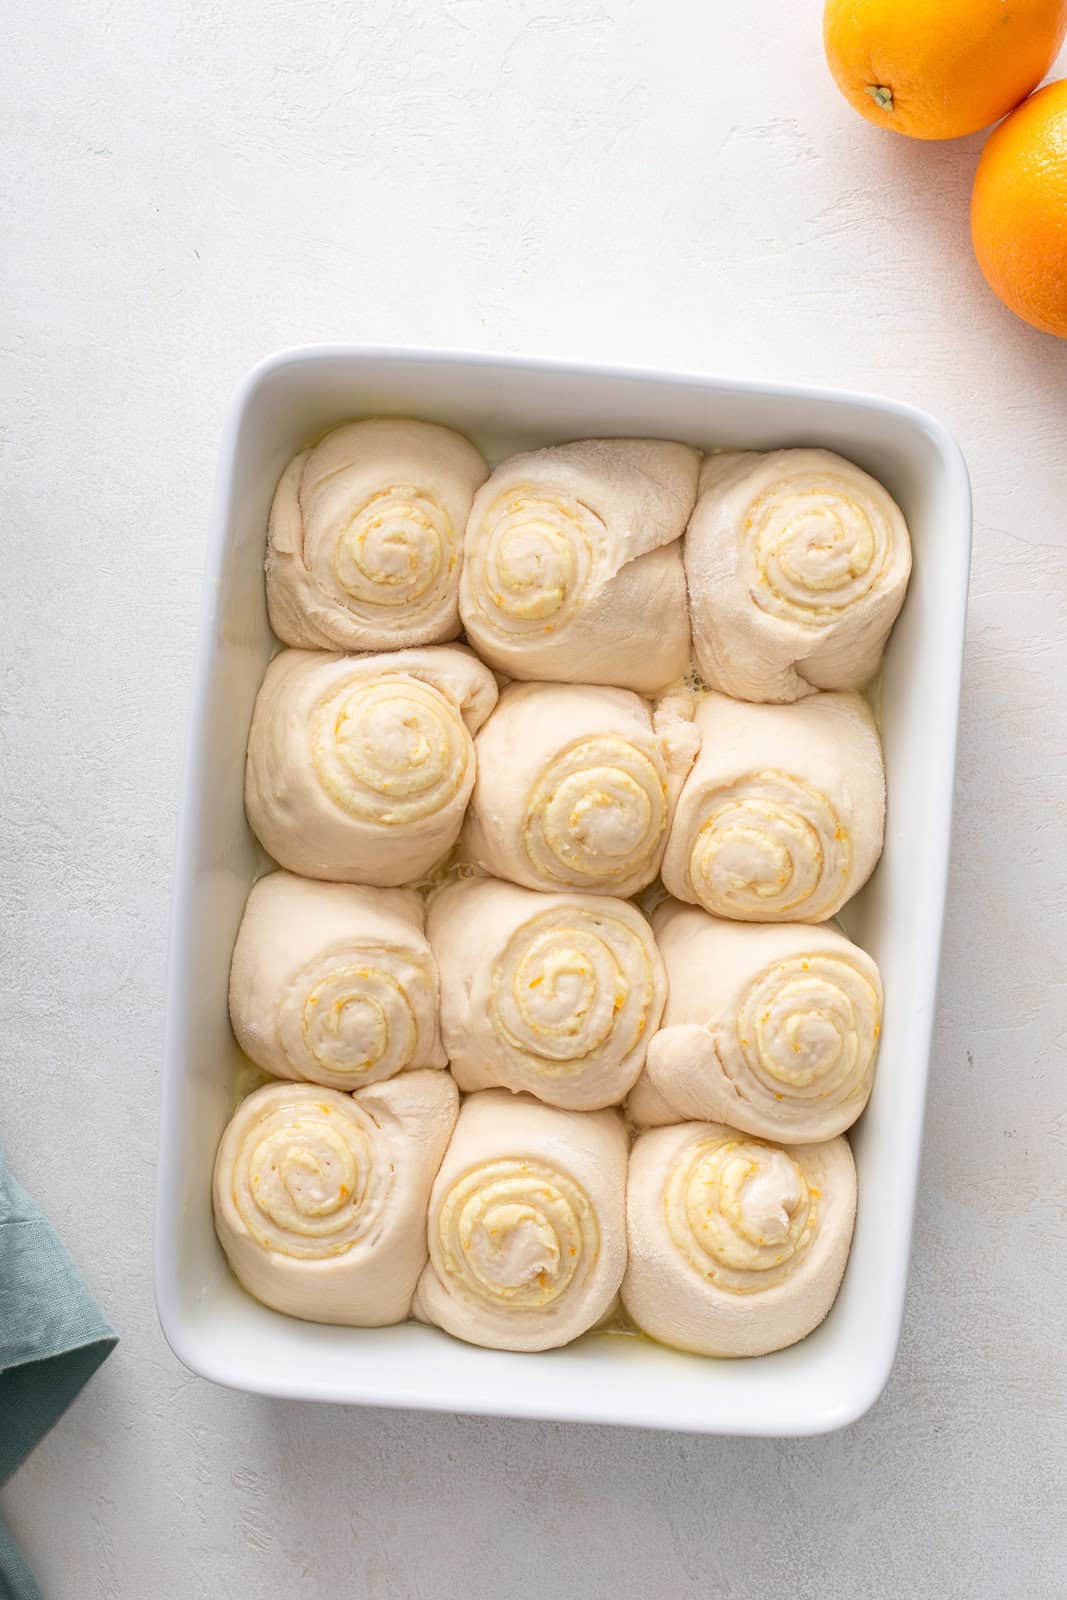 Risen orange rolls in a white baking dish, ready to go in the oven.